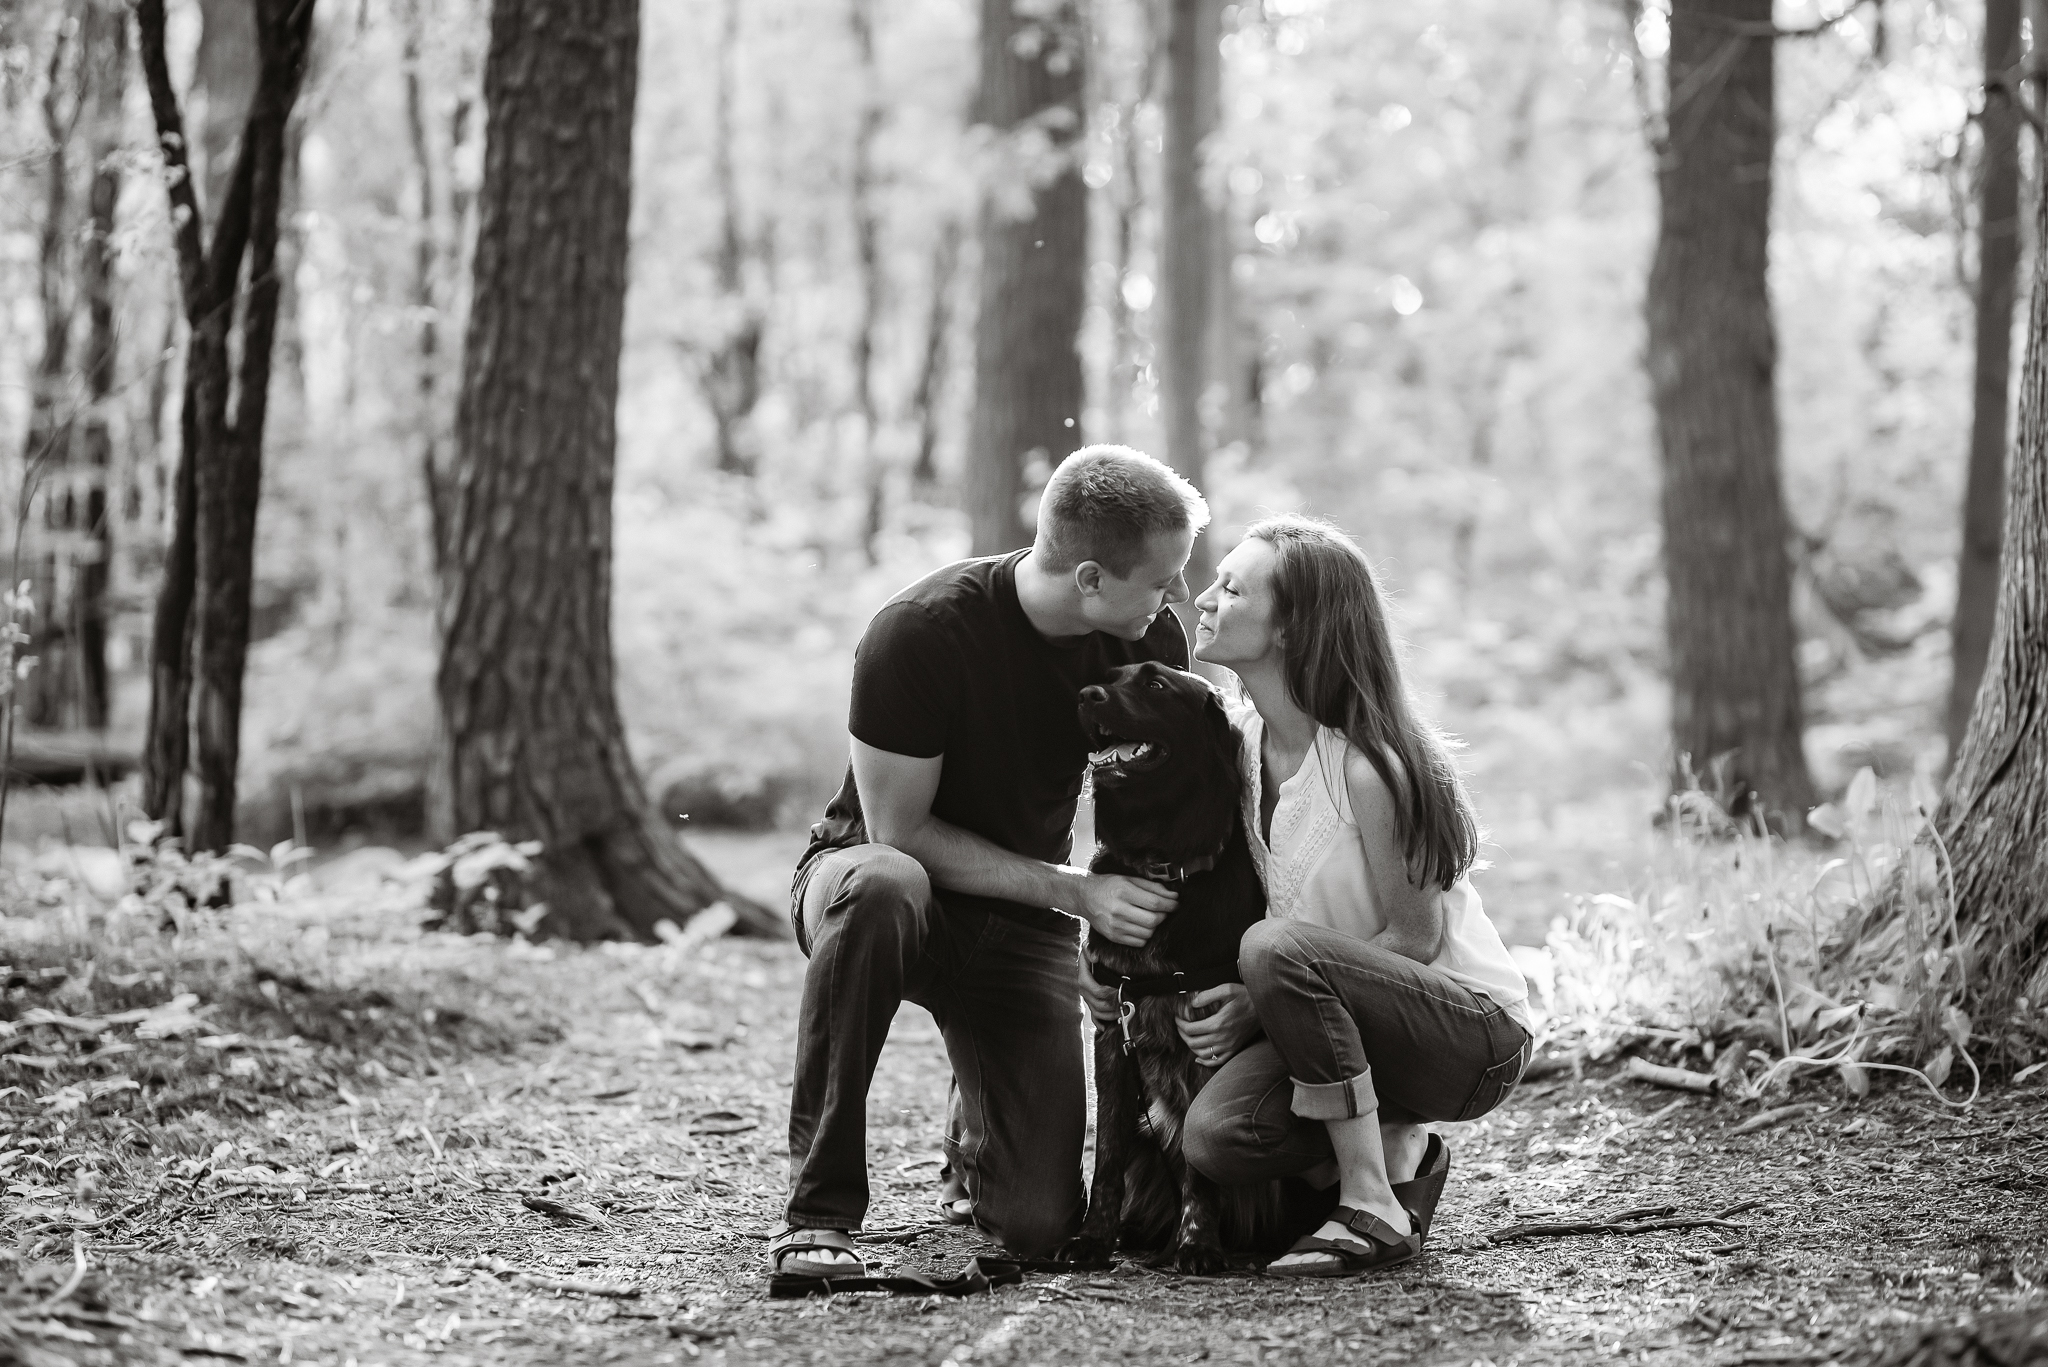 Couples109NaomiLuciennePhotography062019-5-Edit.jpg